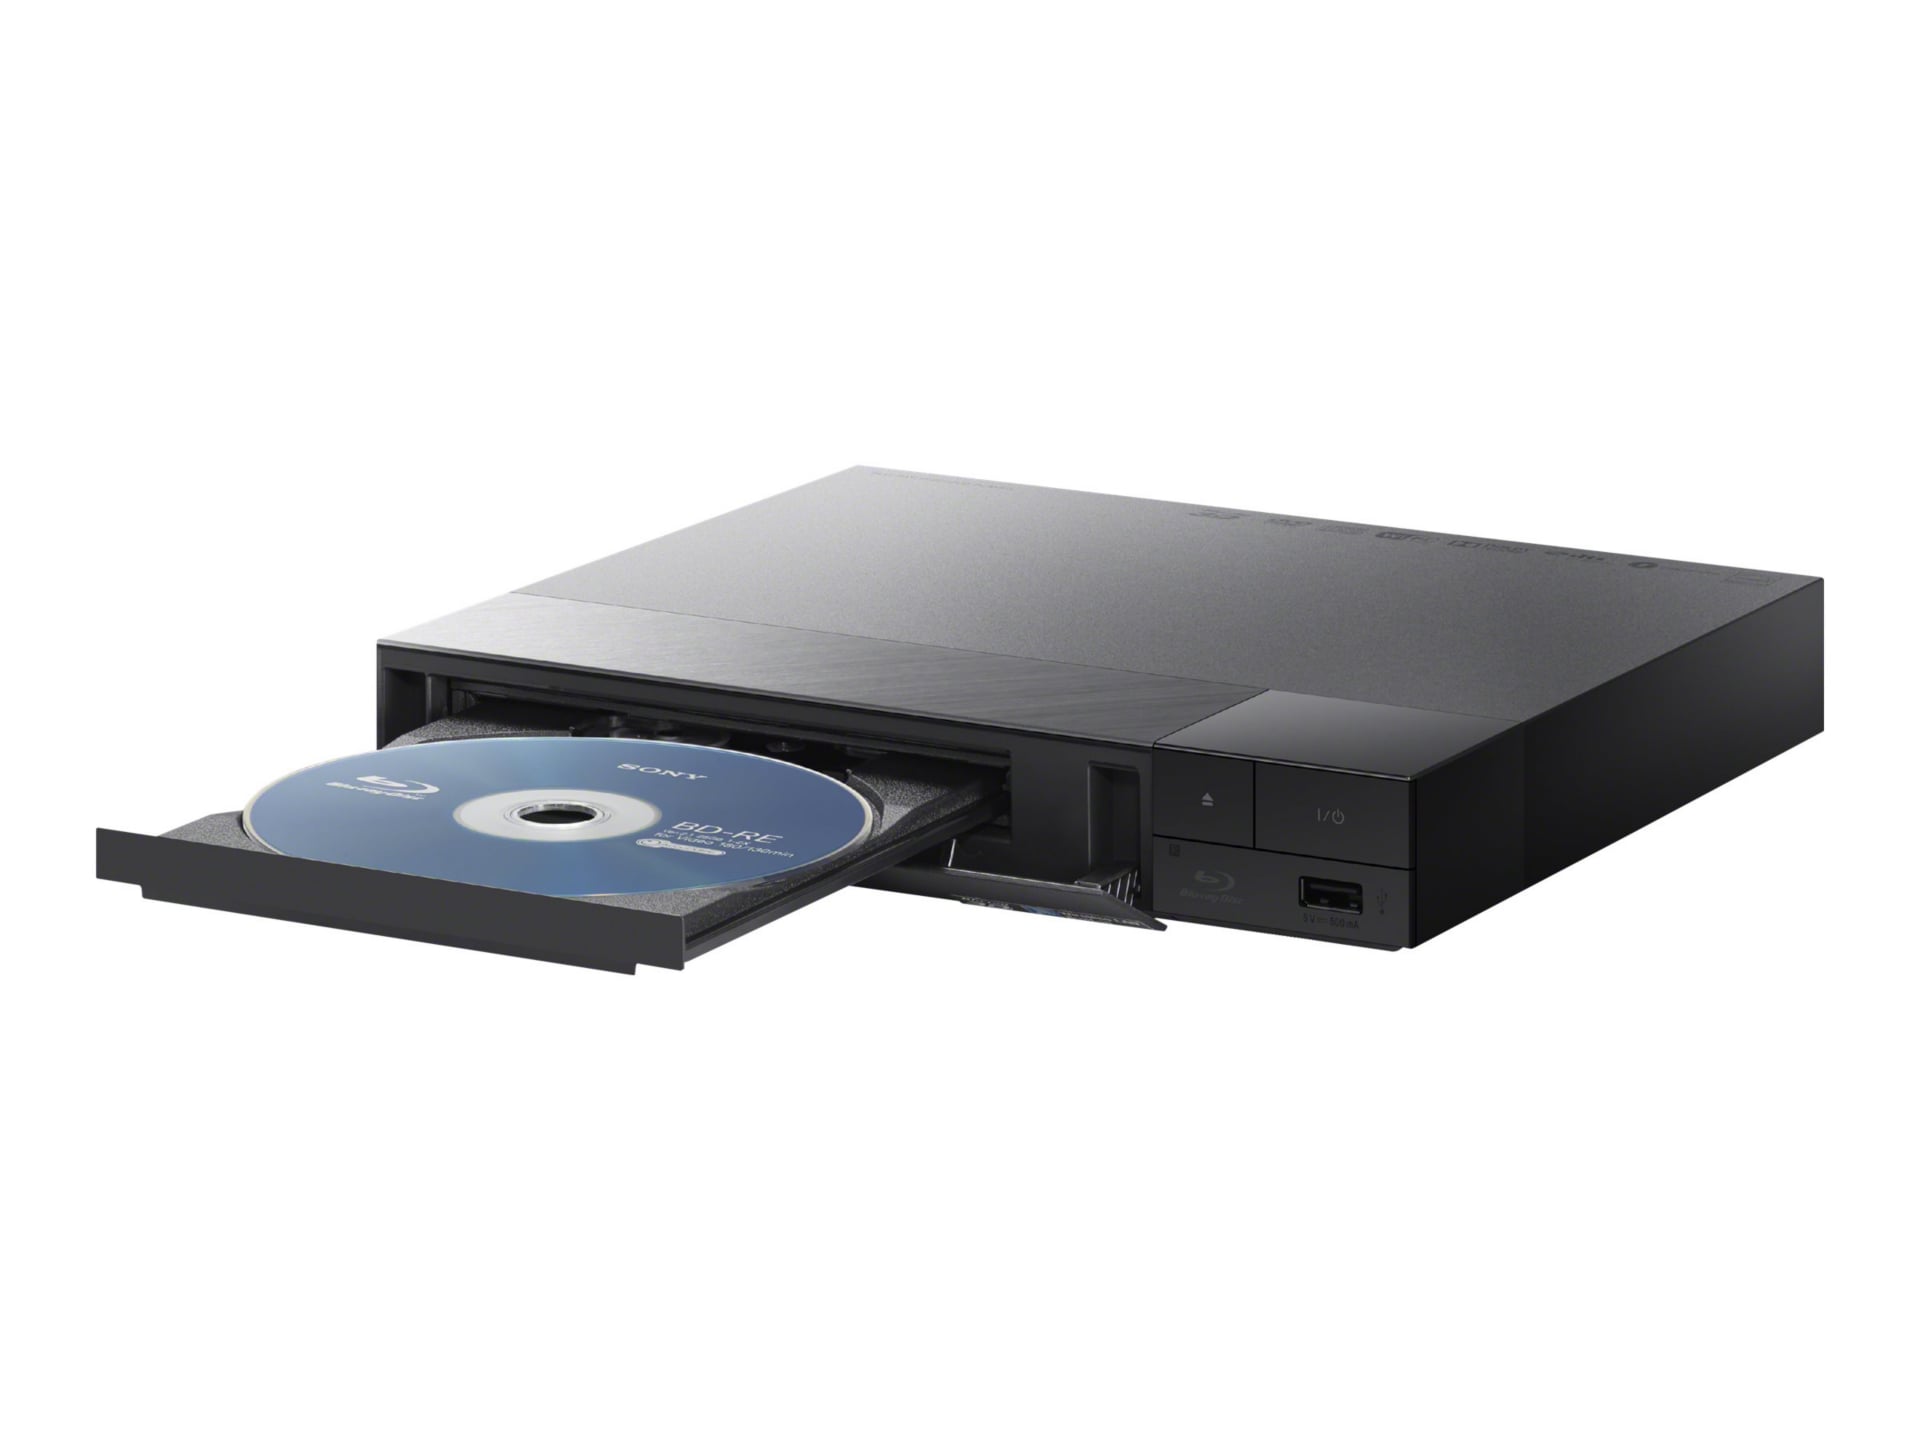 Streaming　Devices　Blu-ray　player　disc　BDPS1700　Sony　BDP-S1700